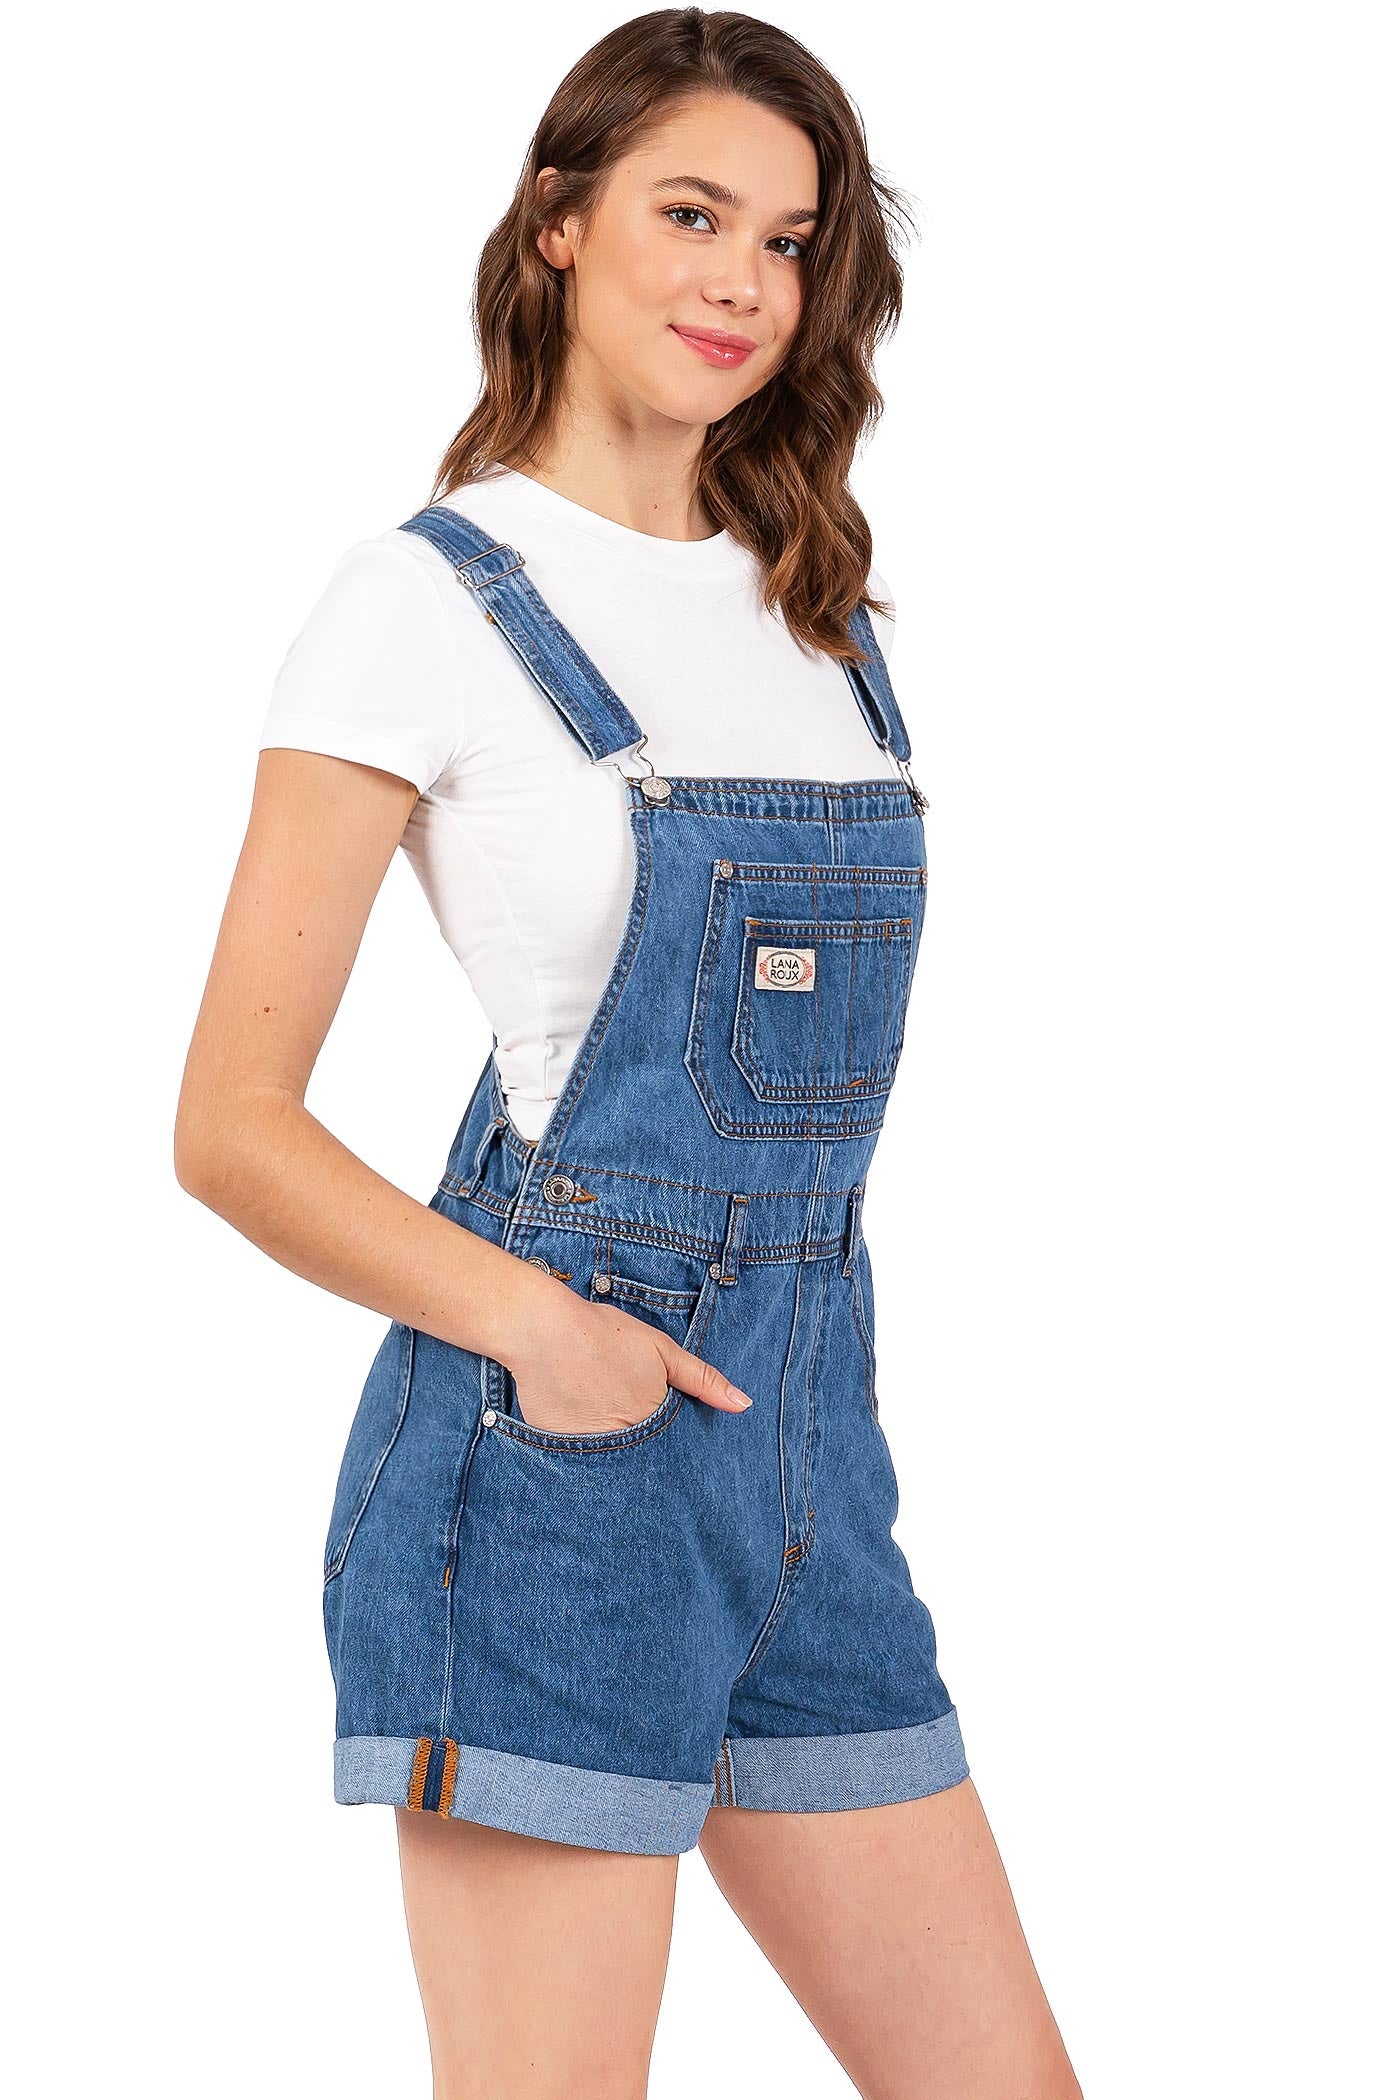 Lana Roux Womens Relaxed Fit Oversized Boyfriend Jean Short Overalls